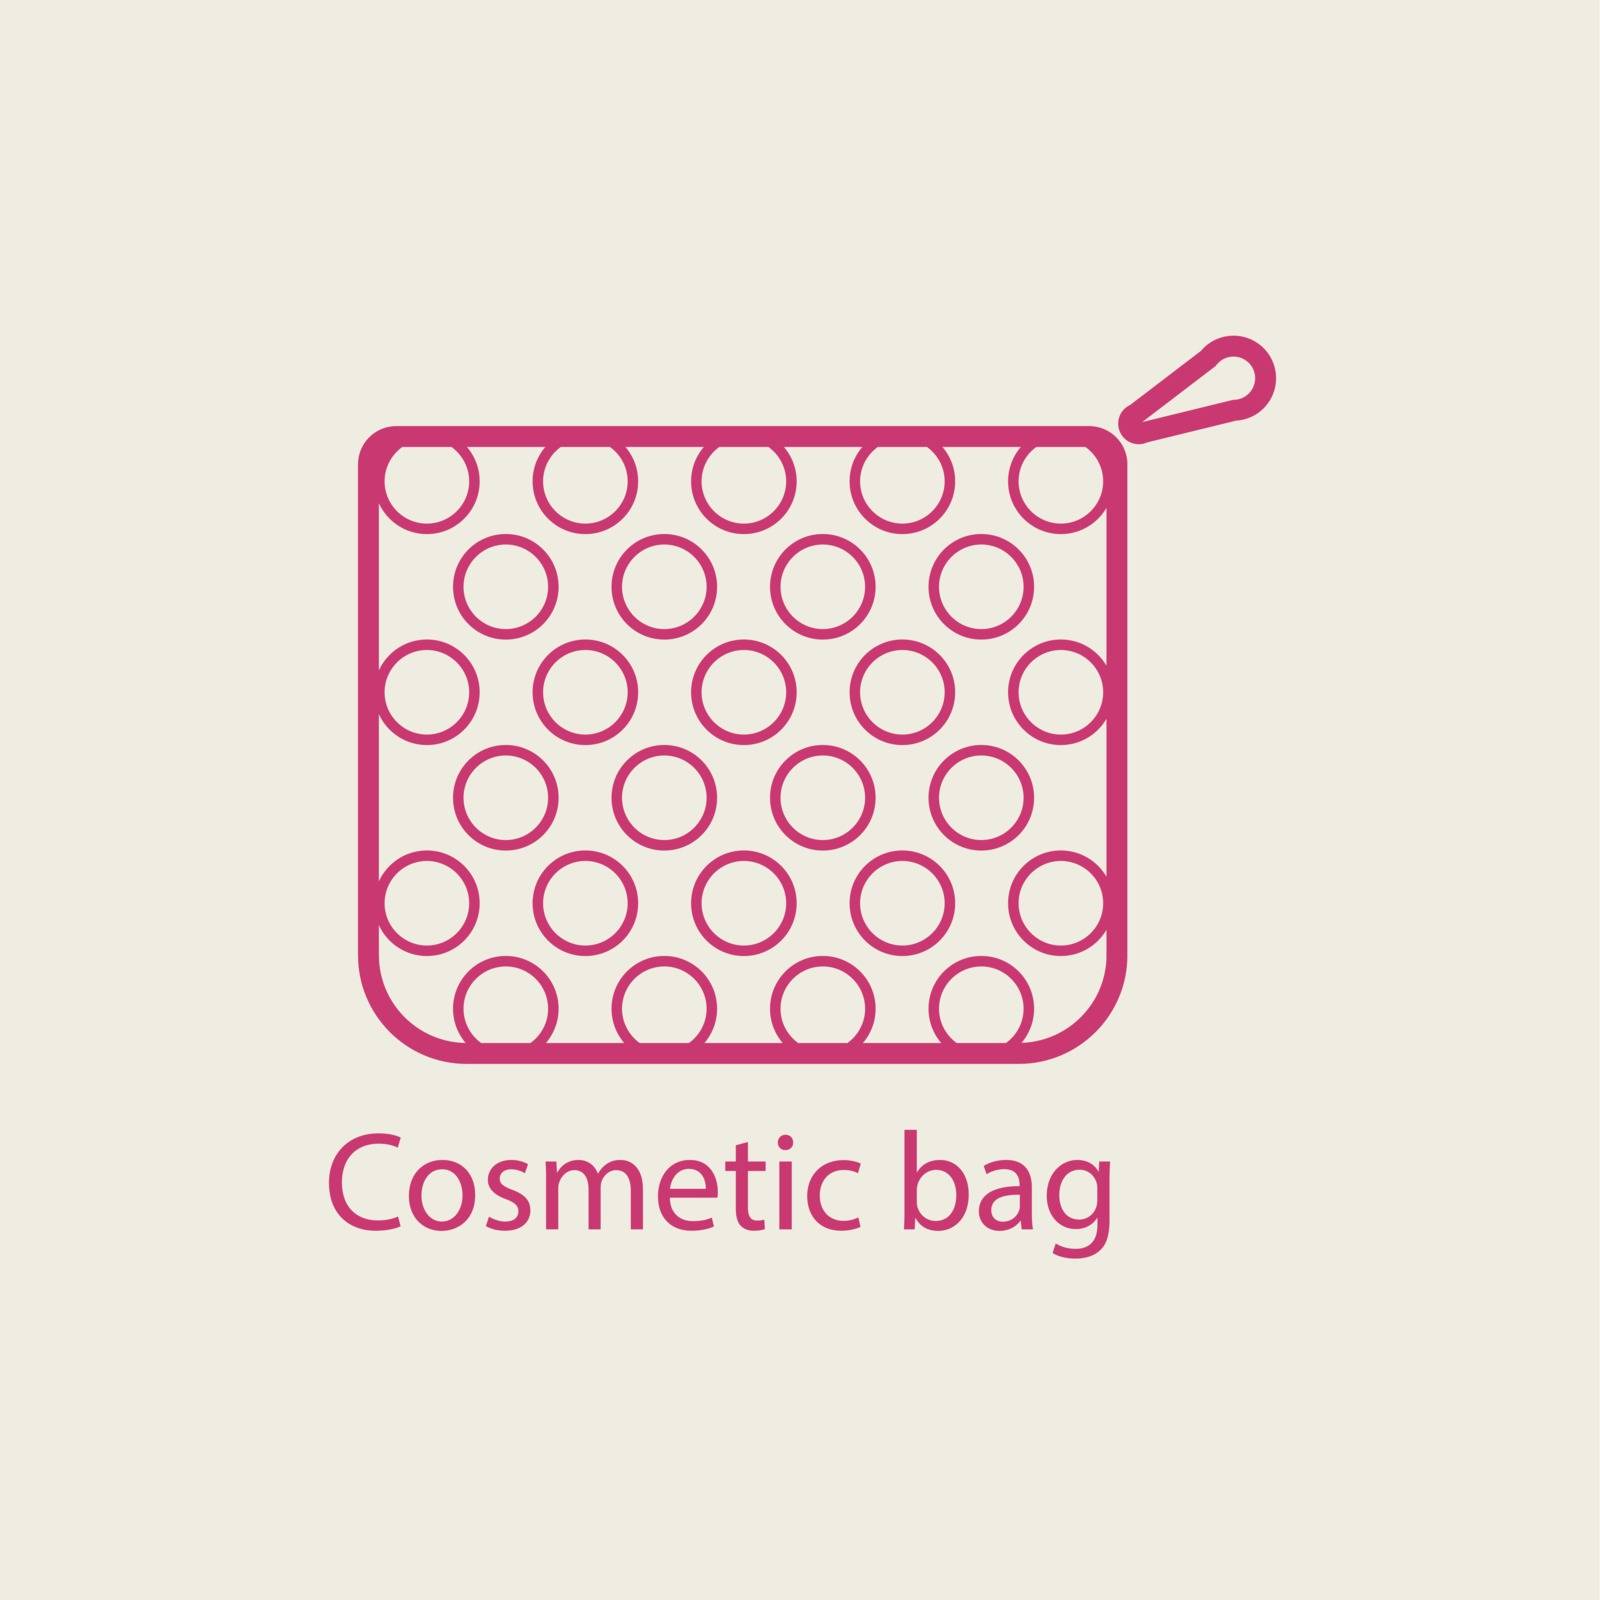 Cosmetic bag thin line icon. Make up bag icon illustration isolated outline.